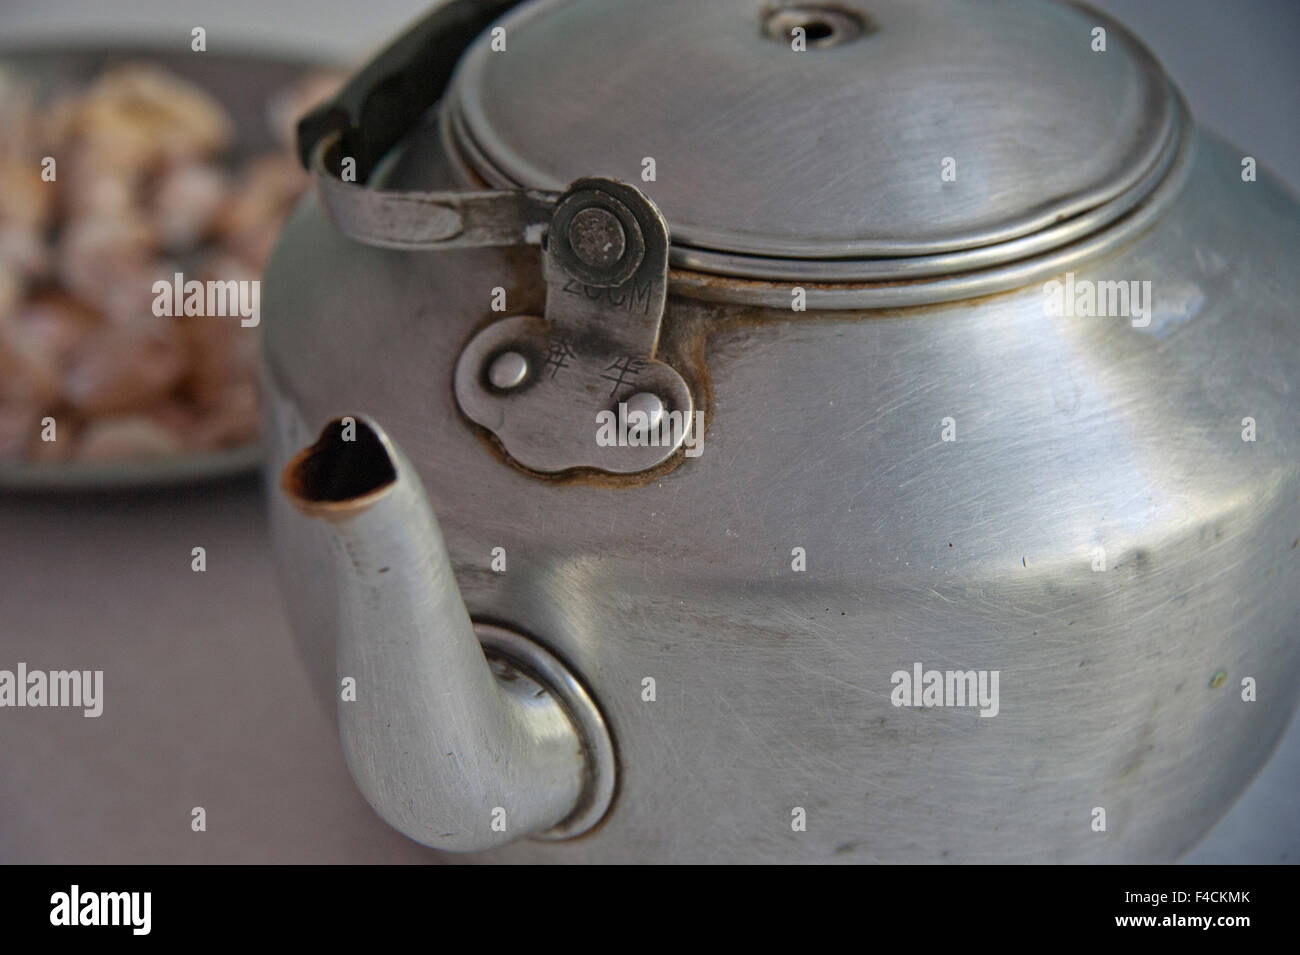 China, Xinjiang, Manas. A well-used aluminum tea pot sits on the table at Muslim restaurant. Stock Photo